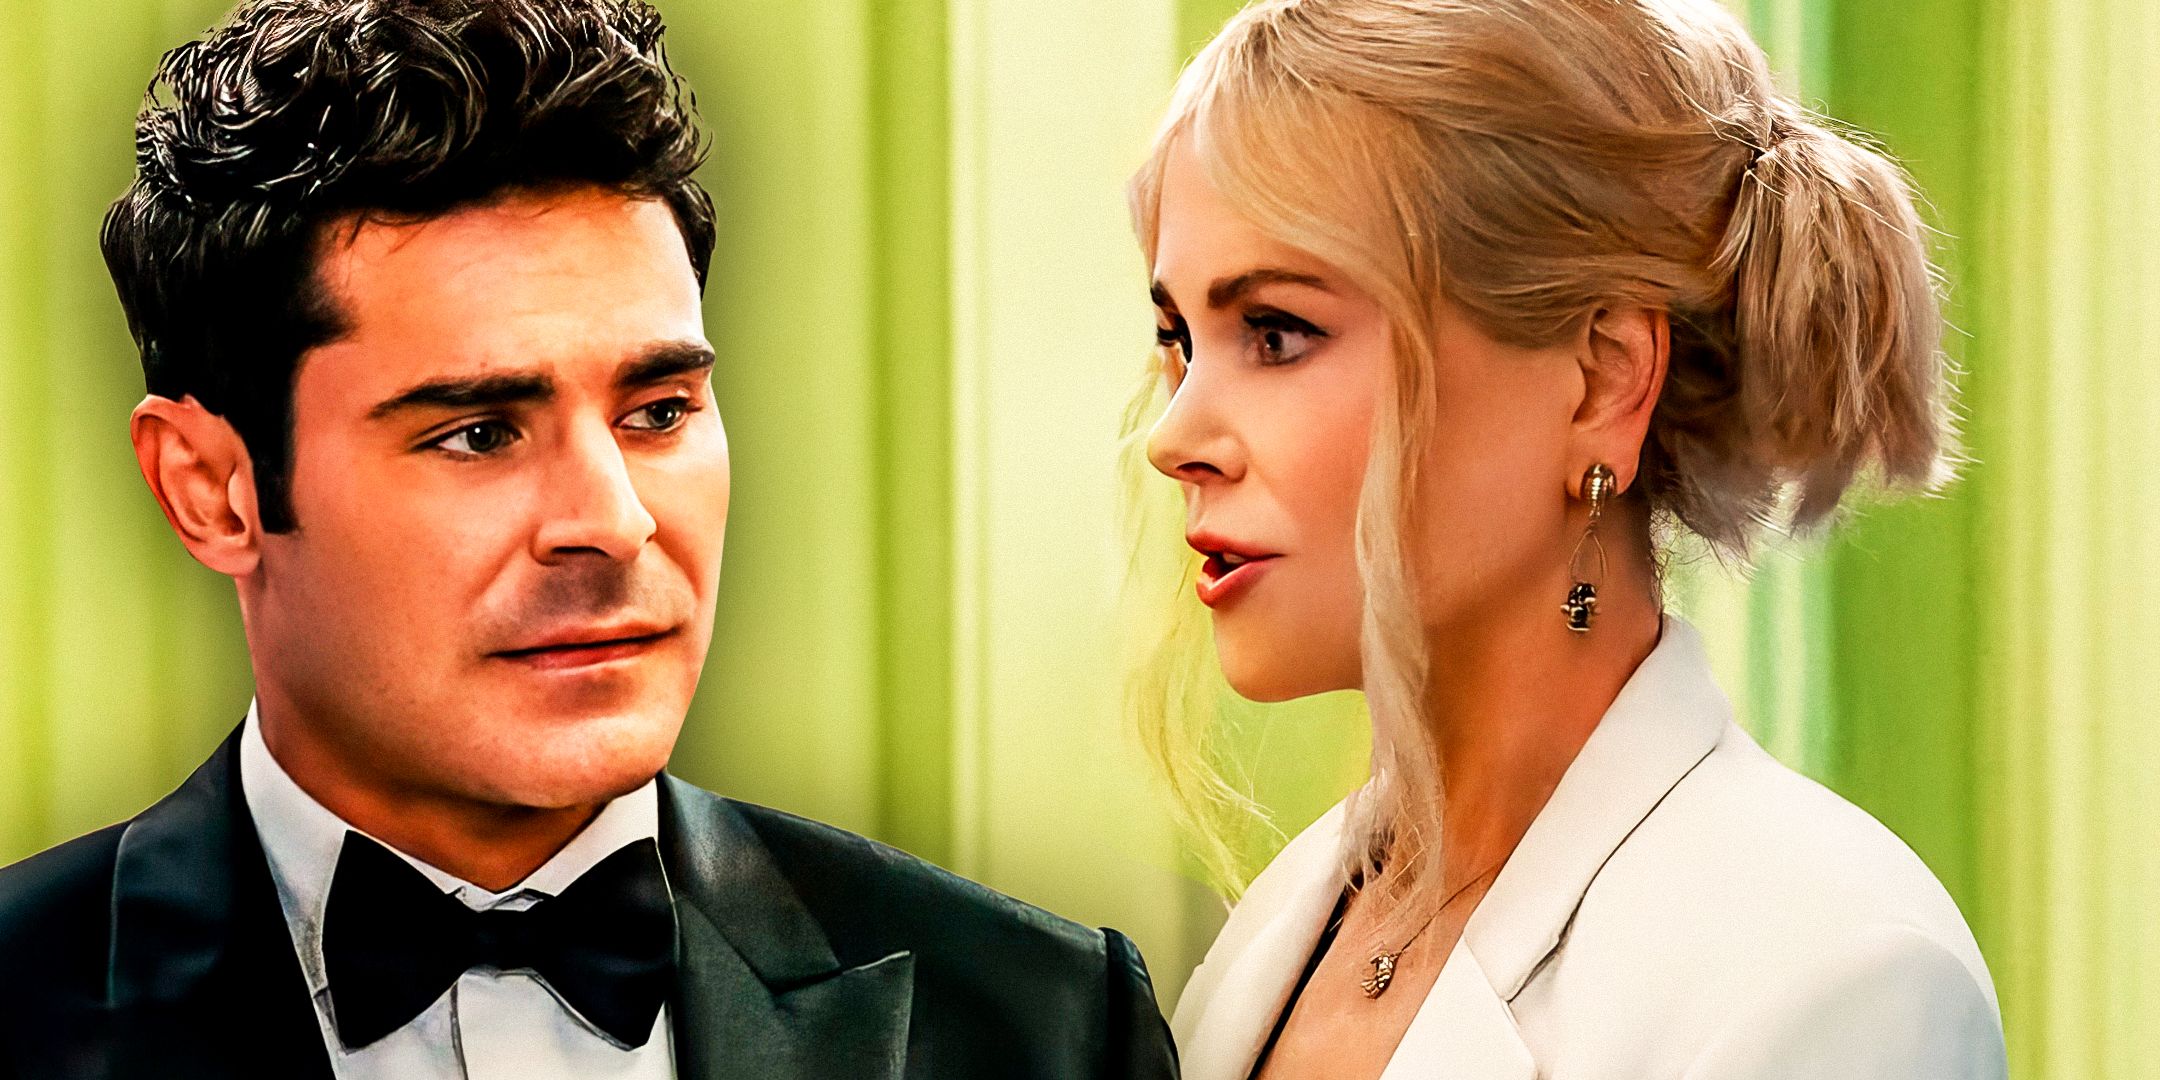 Zac Efron and Nicole Kidman in A Family Affair.